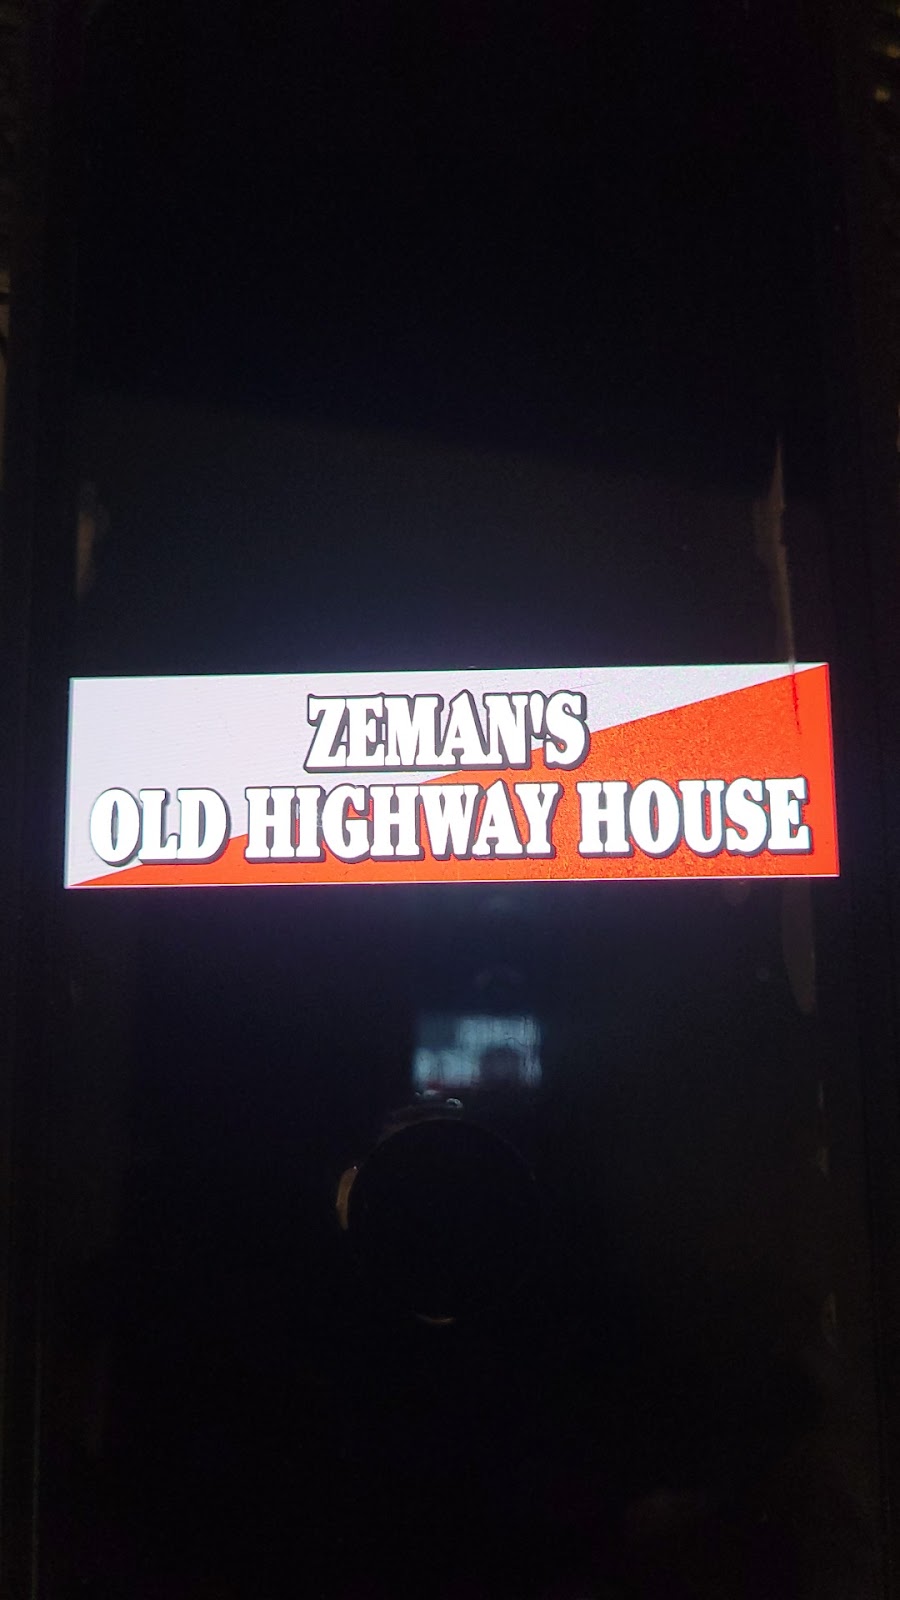 Zemans Old Highway House | 620 W Pine St, Baraboo, WI 53913 | Phone: (608) 448-2447